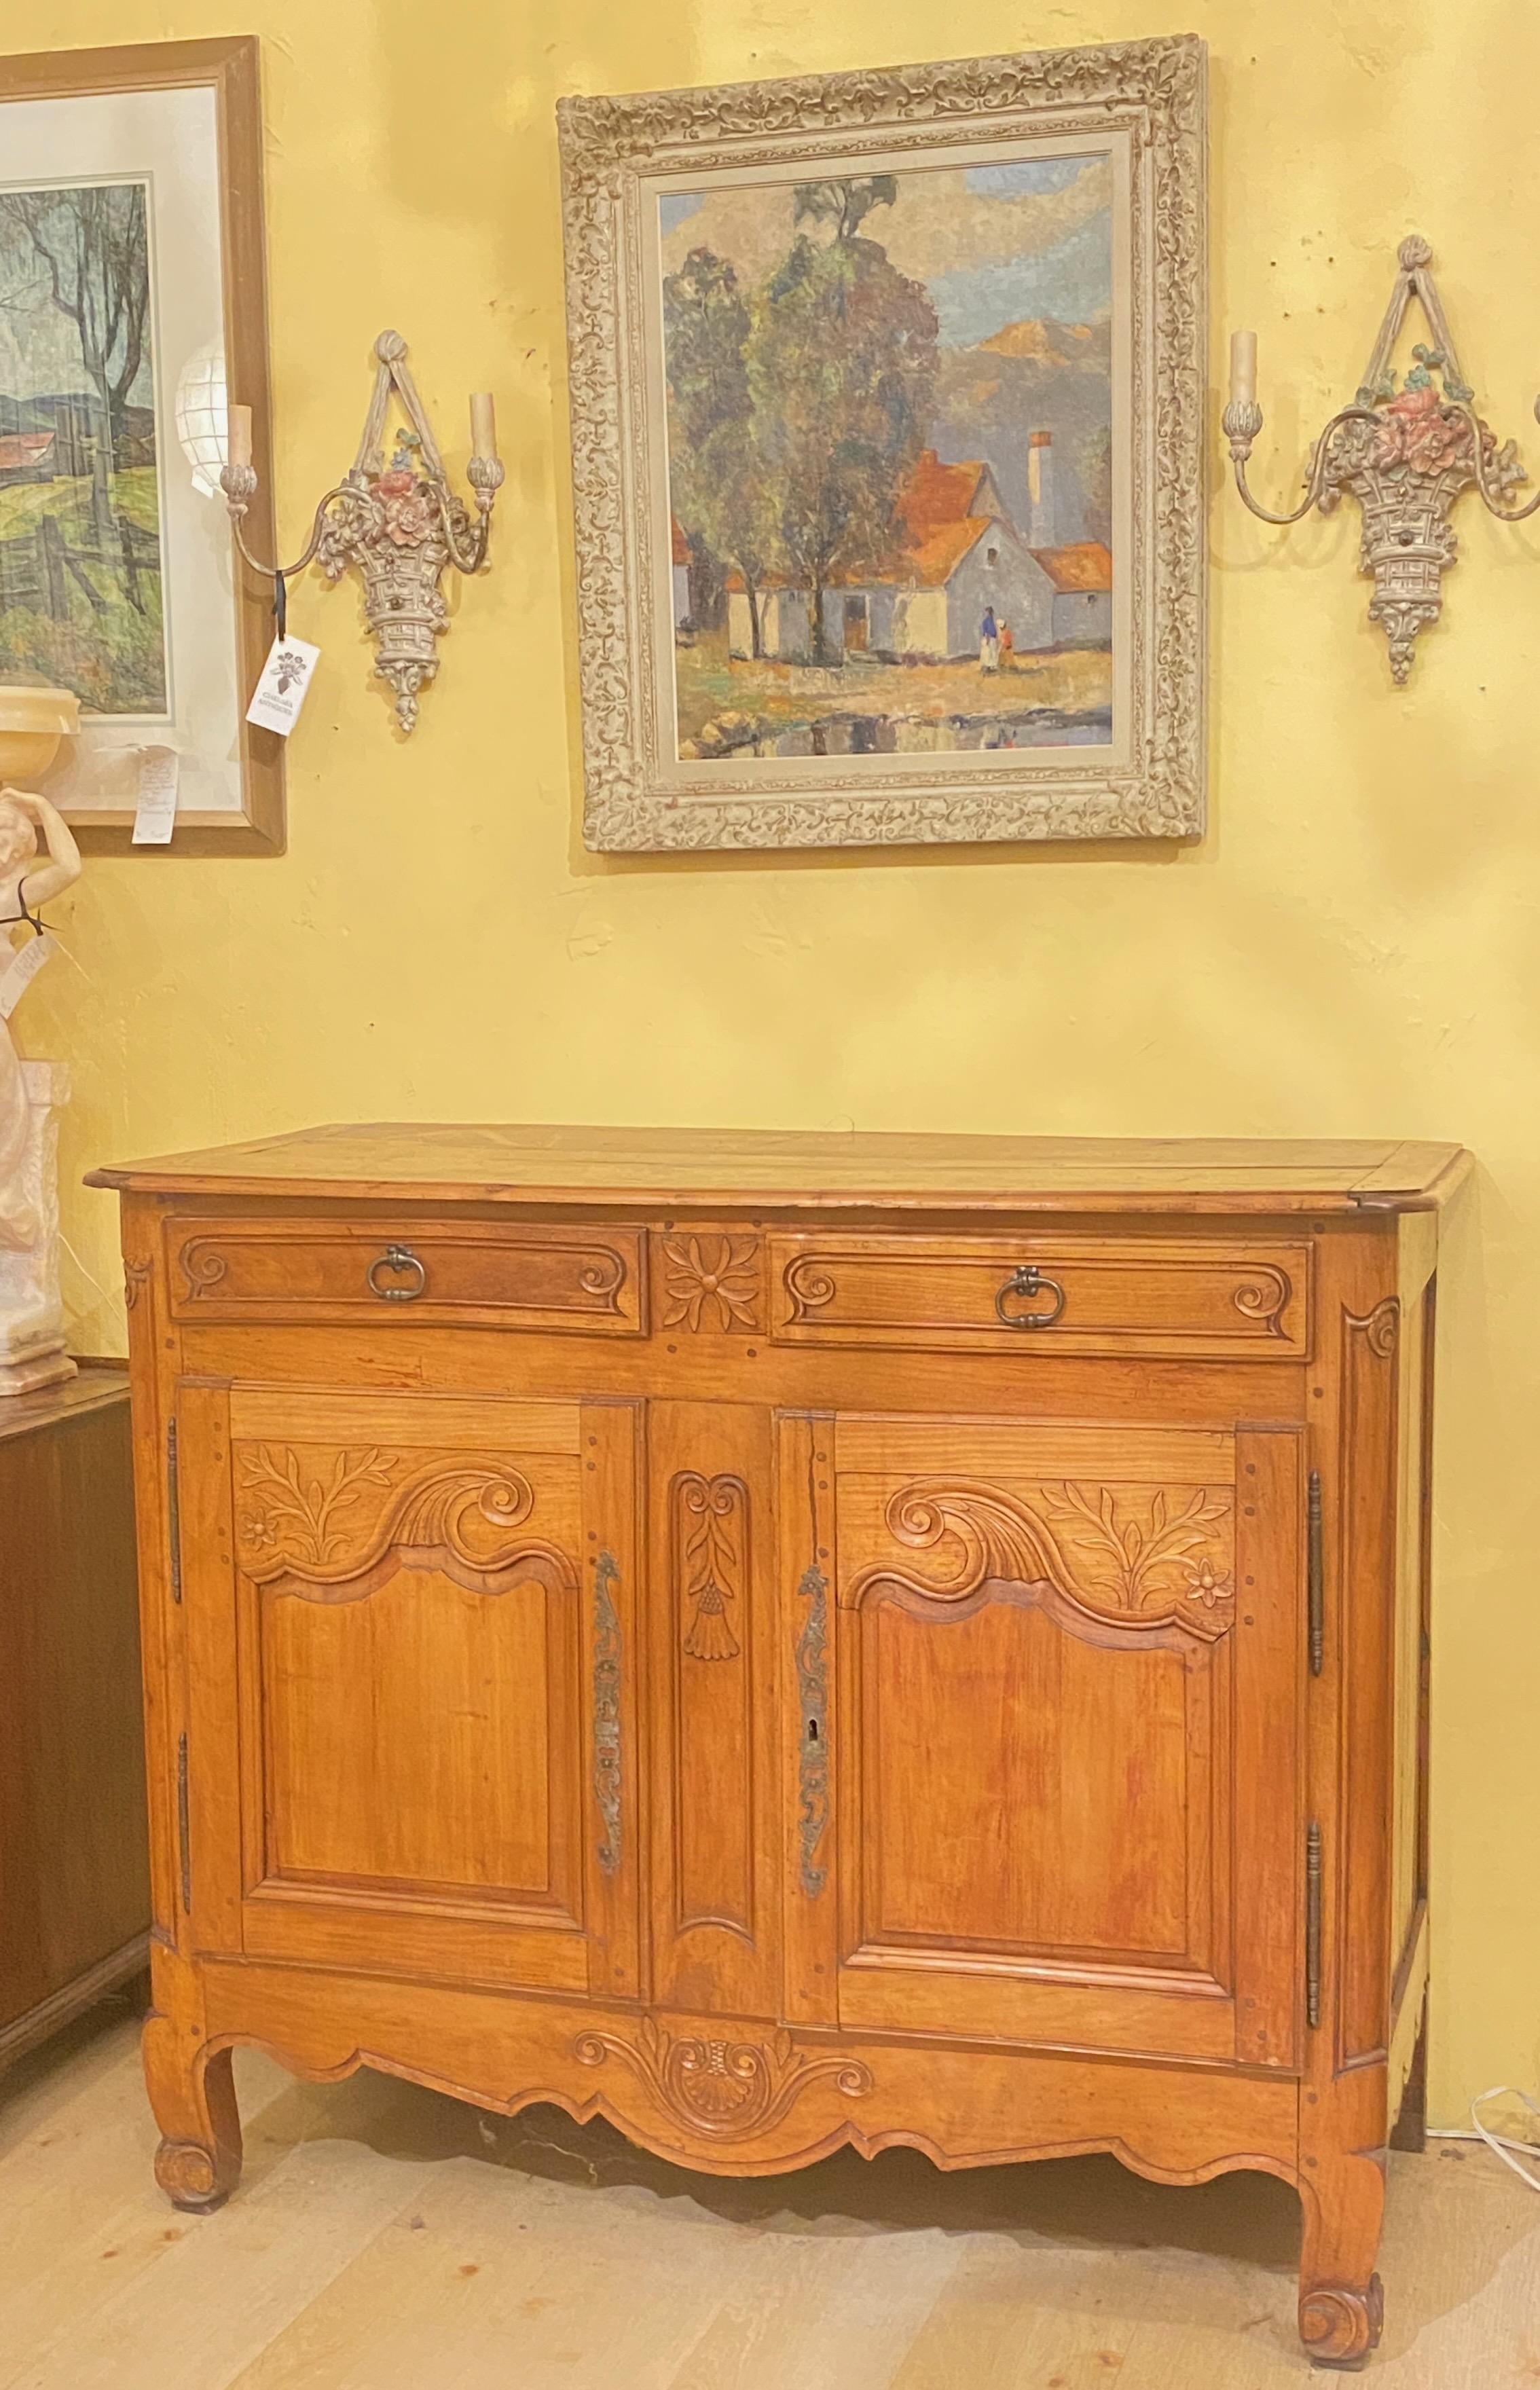 An excellent example of a traditional French Provincial cherry wood buffet with original key.
In excellent antique condition and having a beautiful satin finish.
This was most likely Buffet de Corp so there would have been a top section, and the